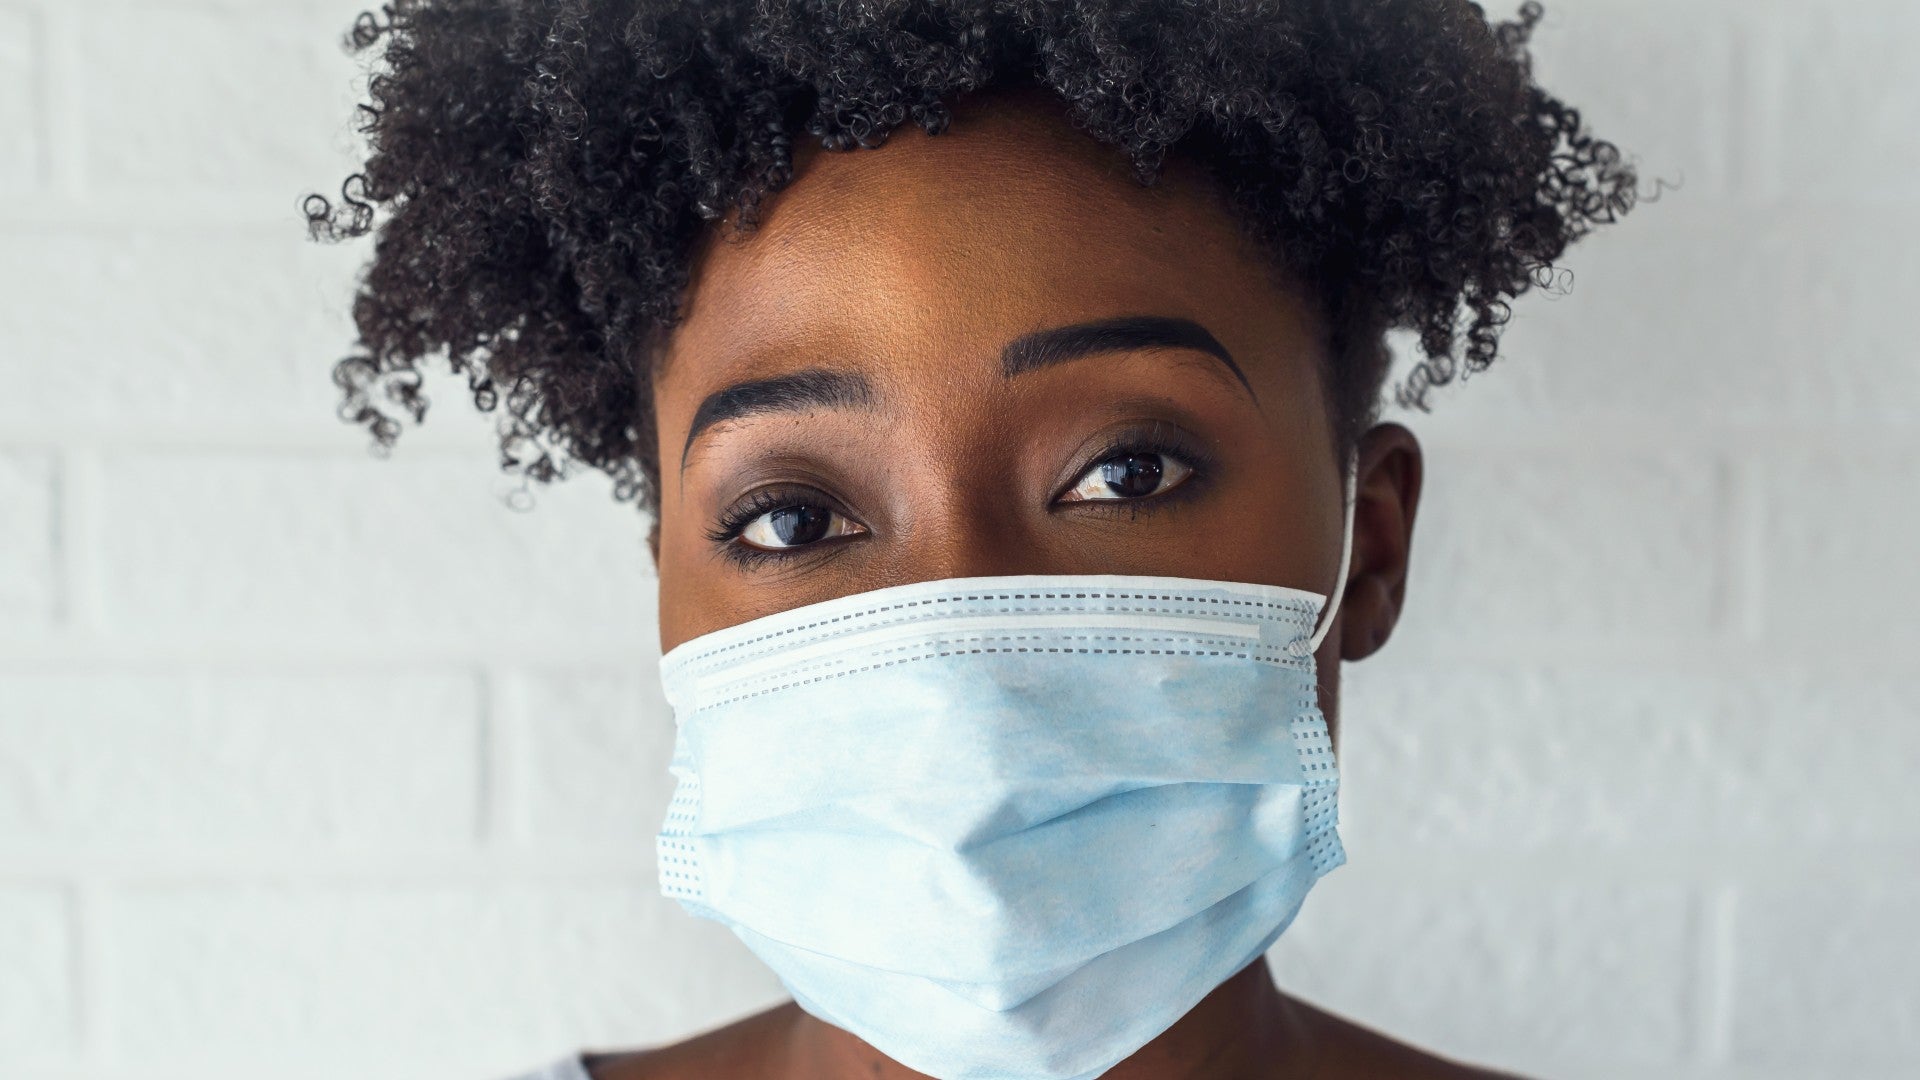 7 Fashionable Face Masks To Help Shield You From The Coronavirus